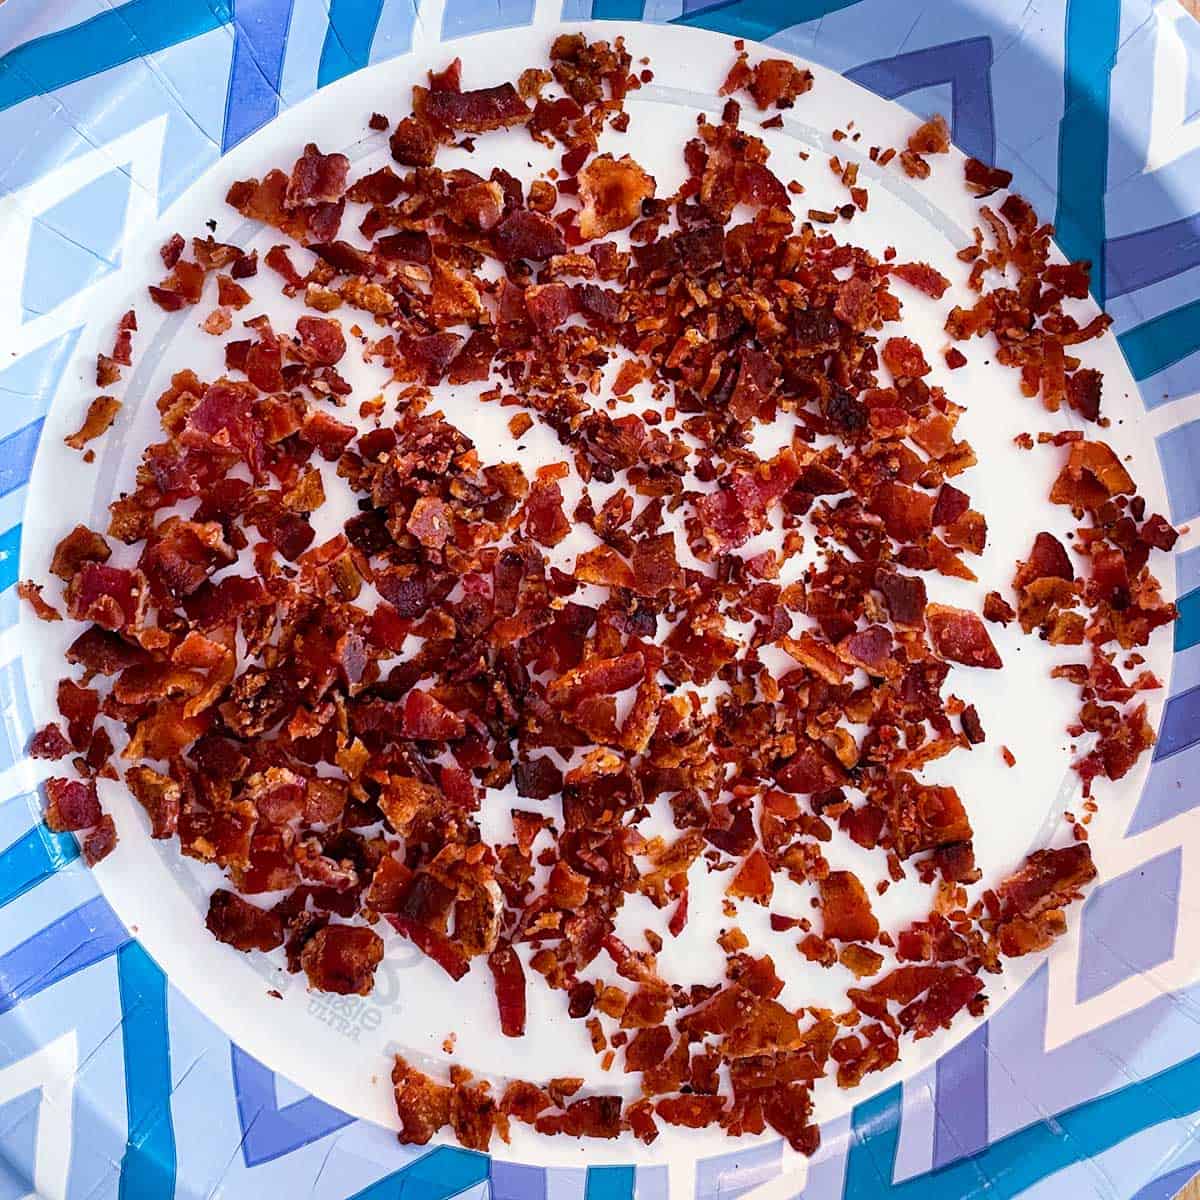 Bacon cooked and crumbled into small pieces for bourbon maple syrup with bacon cookies